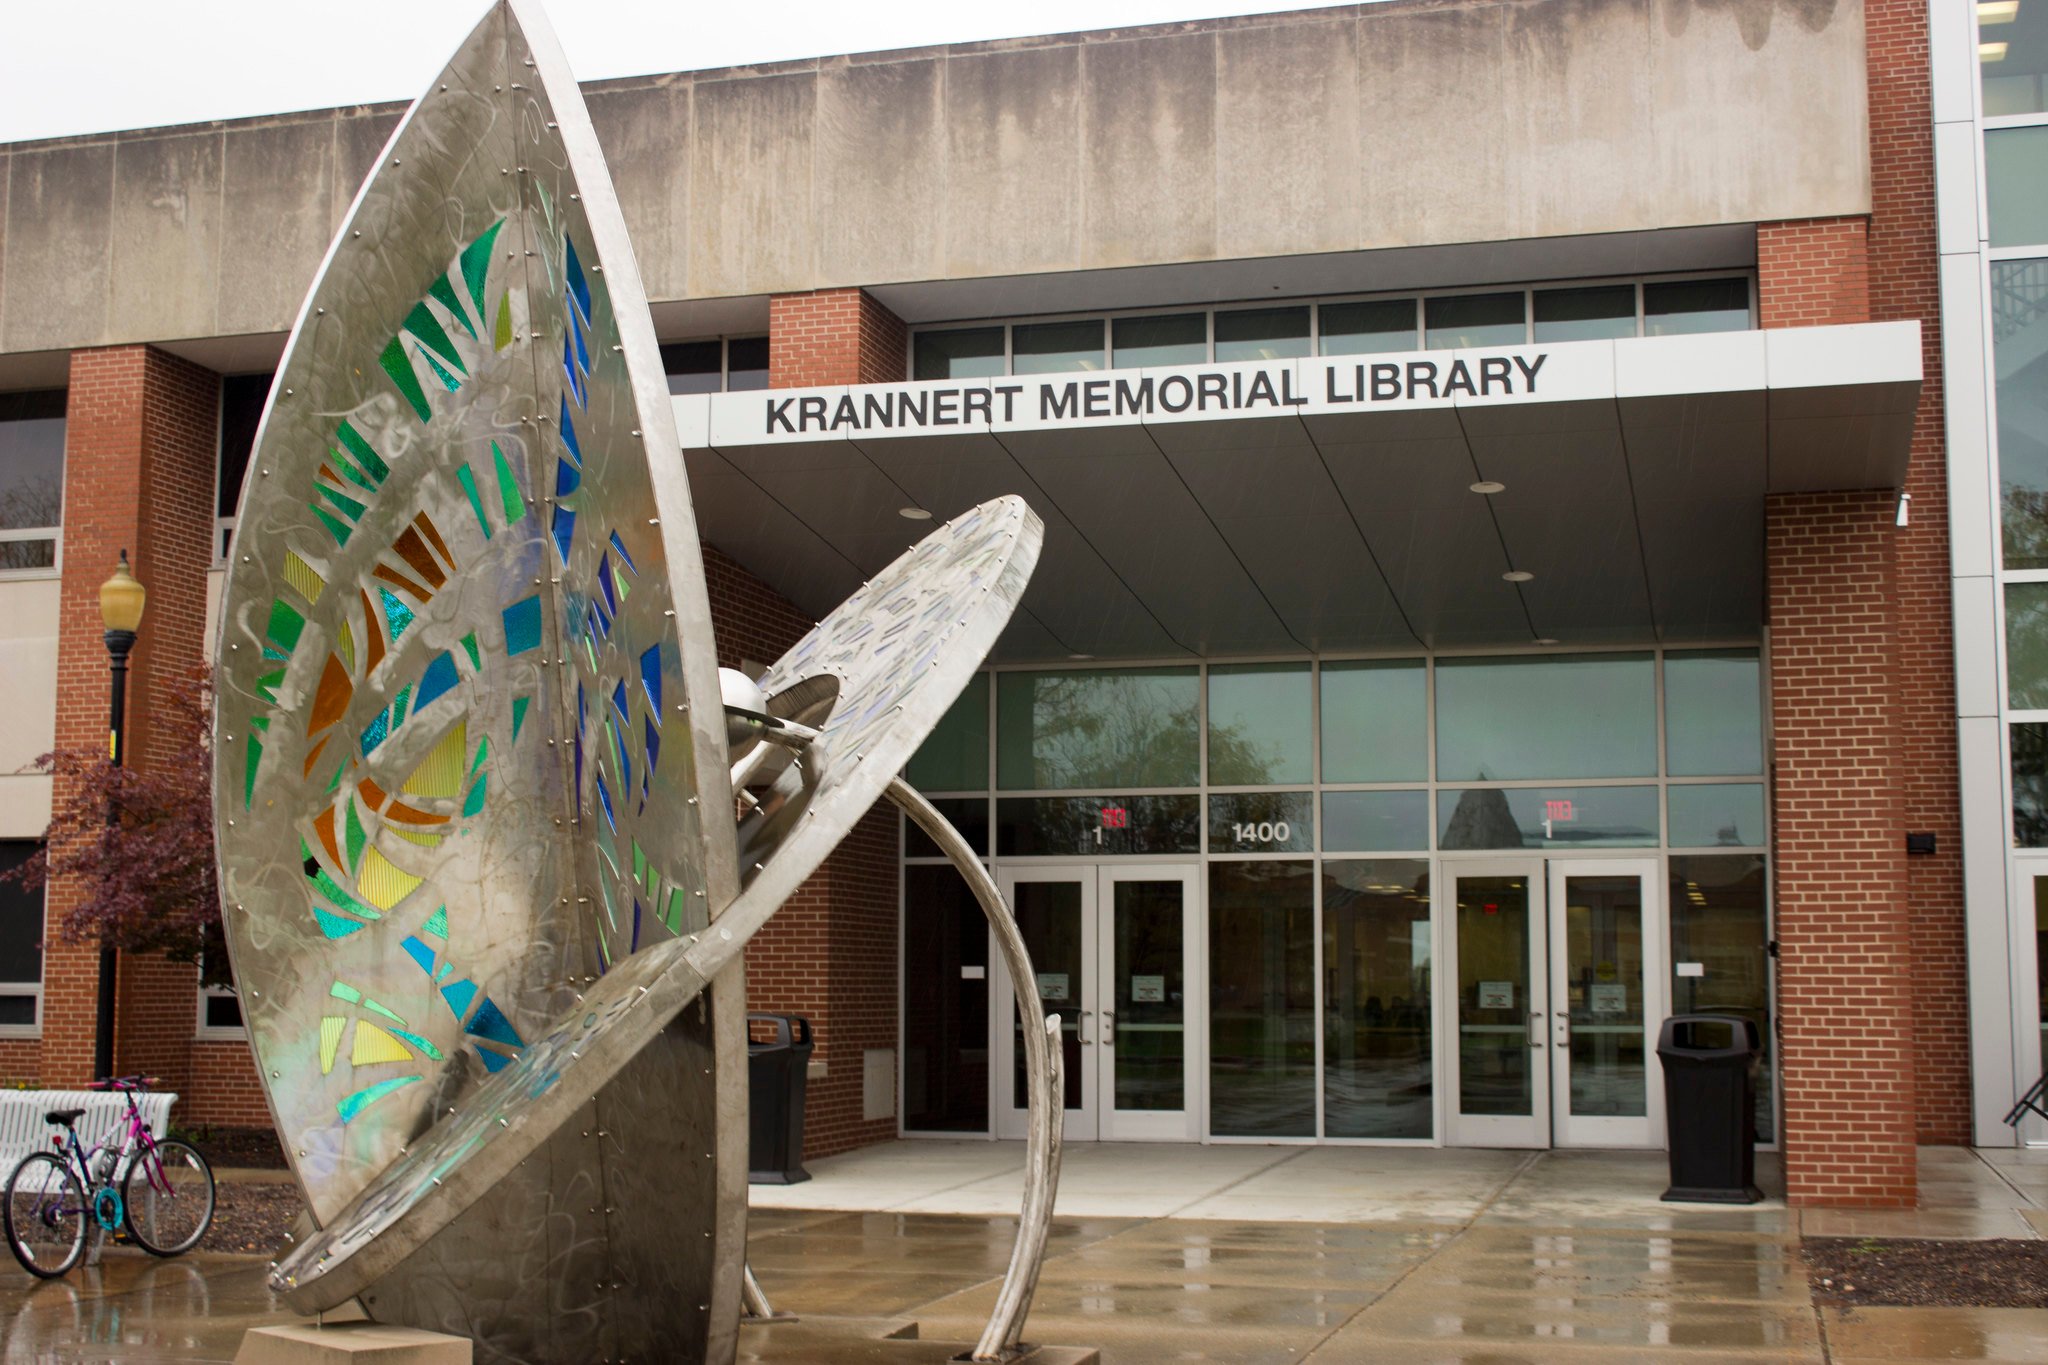 Front facade of Krannert Memorial Library with decorative statue in foreground